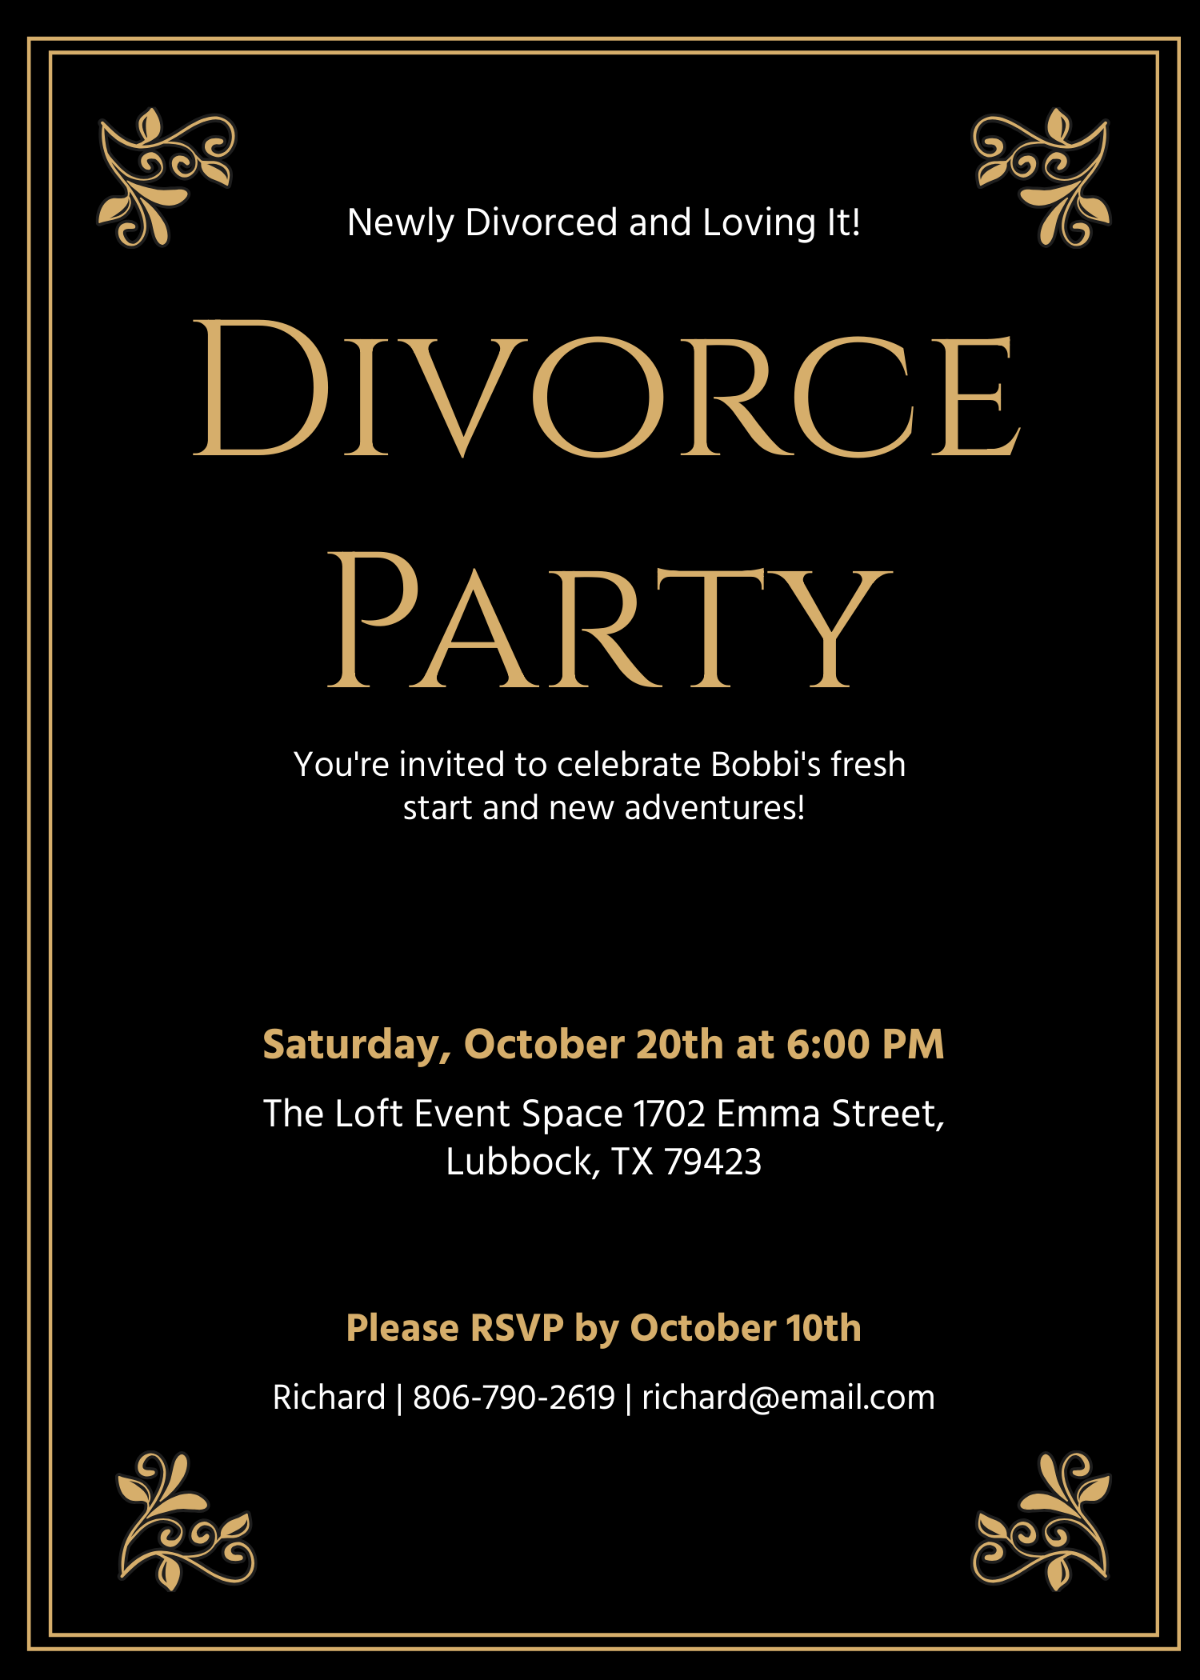 Newly Divorced Party Invitation